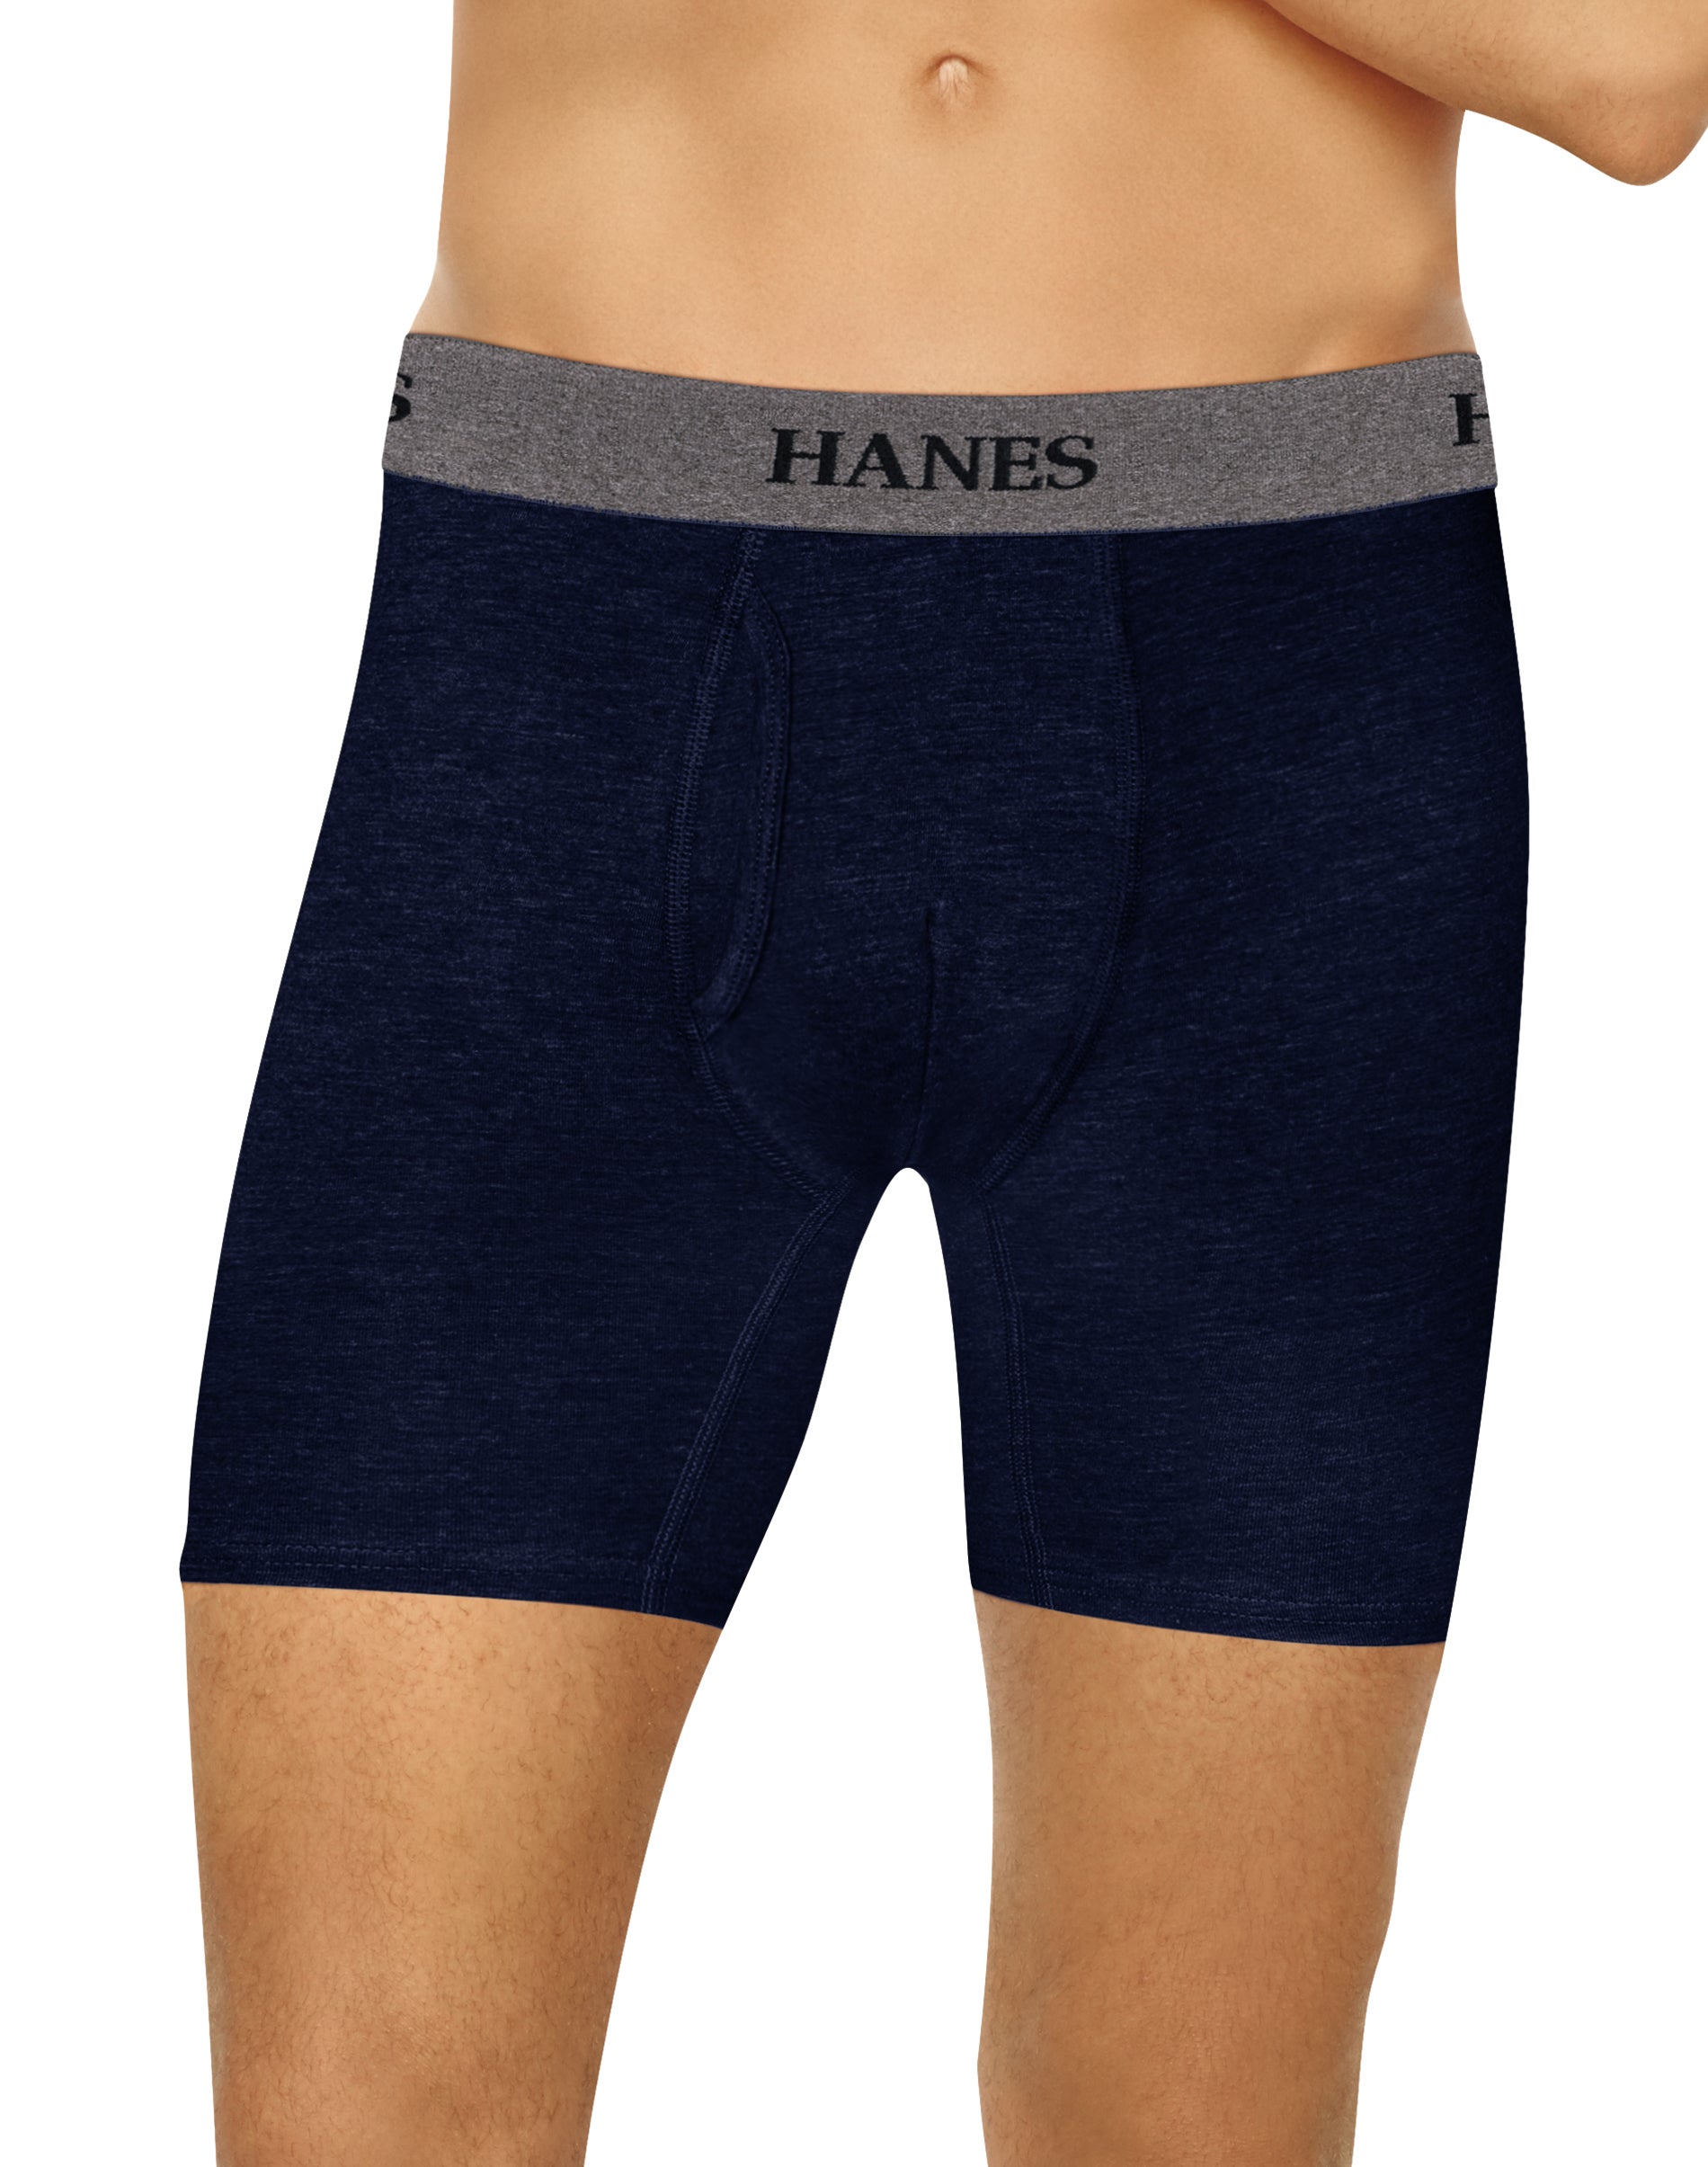 Men's Assorted Comfort Flex Fit Tagless Trunks - 3 Pk by Hanes at